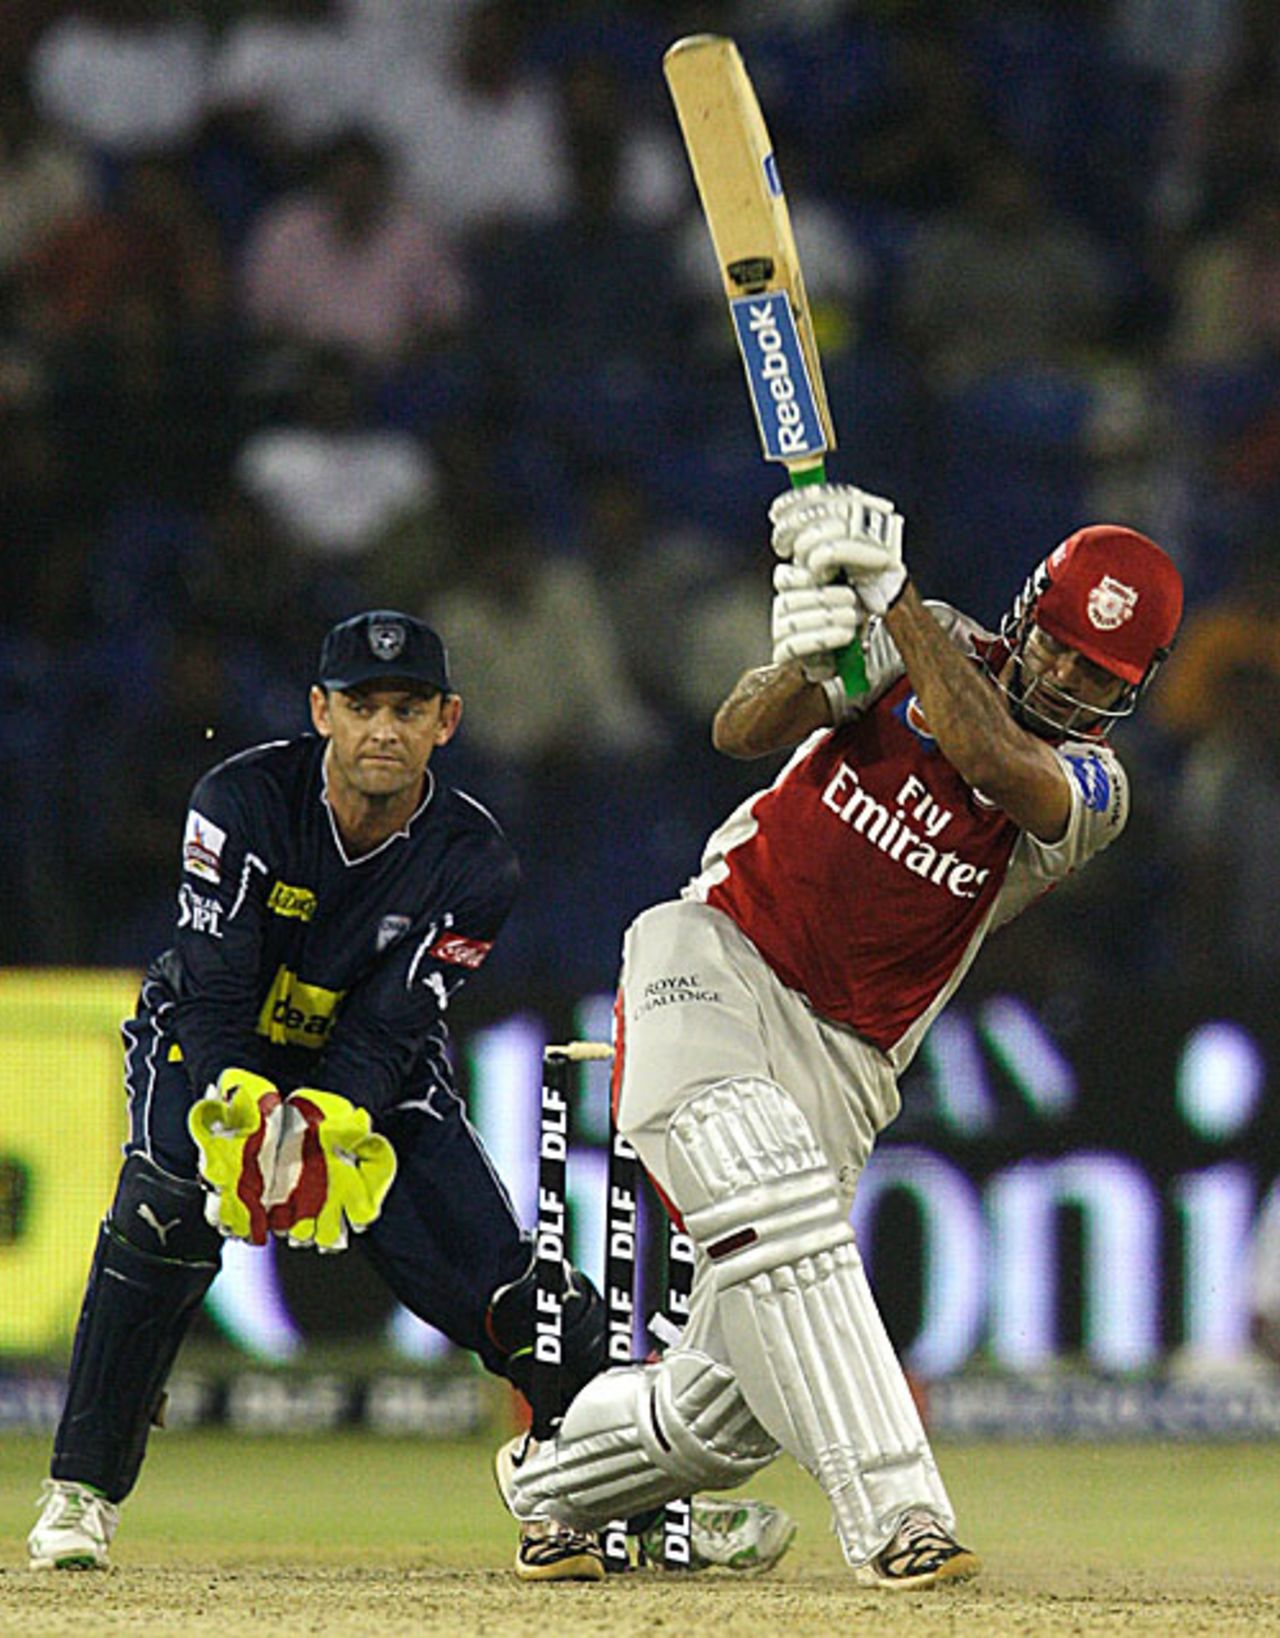 Irfan Pathan's 60 gave Deccan a scare, Deccan Chargers v Kings XI Punjab, IPL, Cuttack, March 19, 2010 